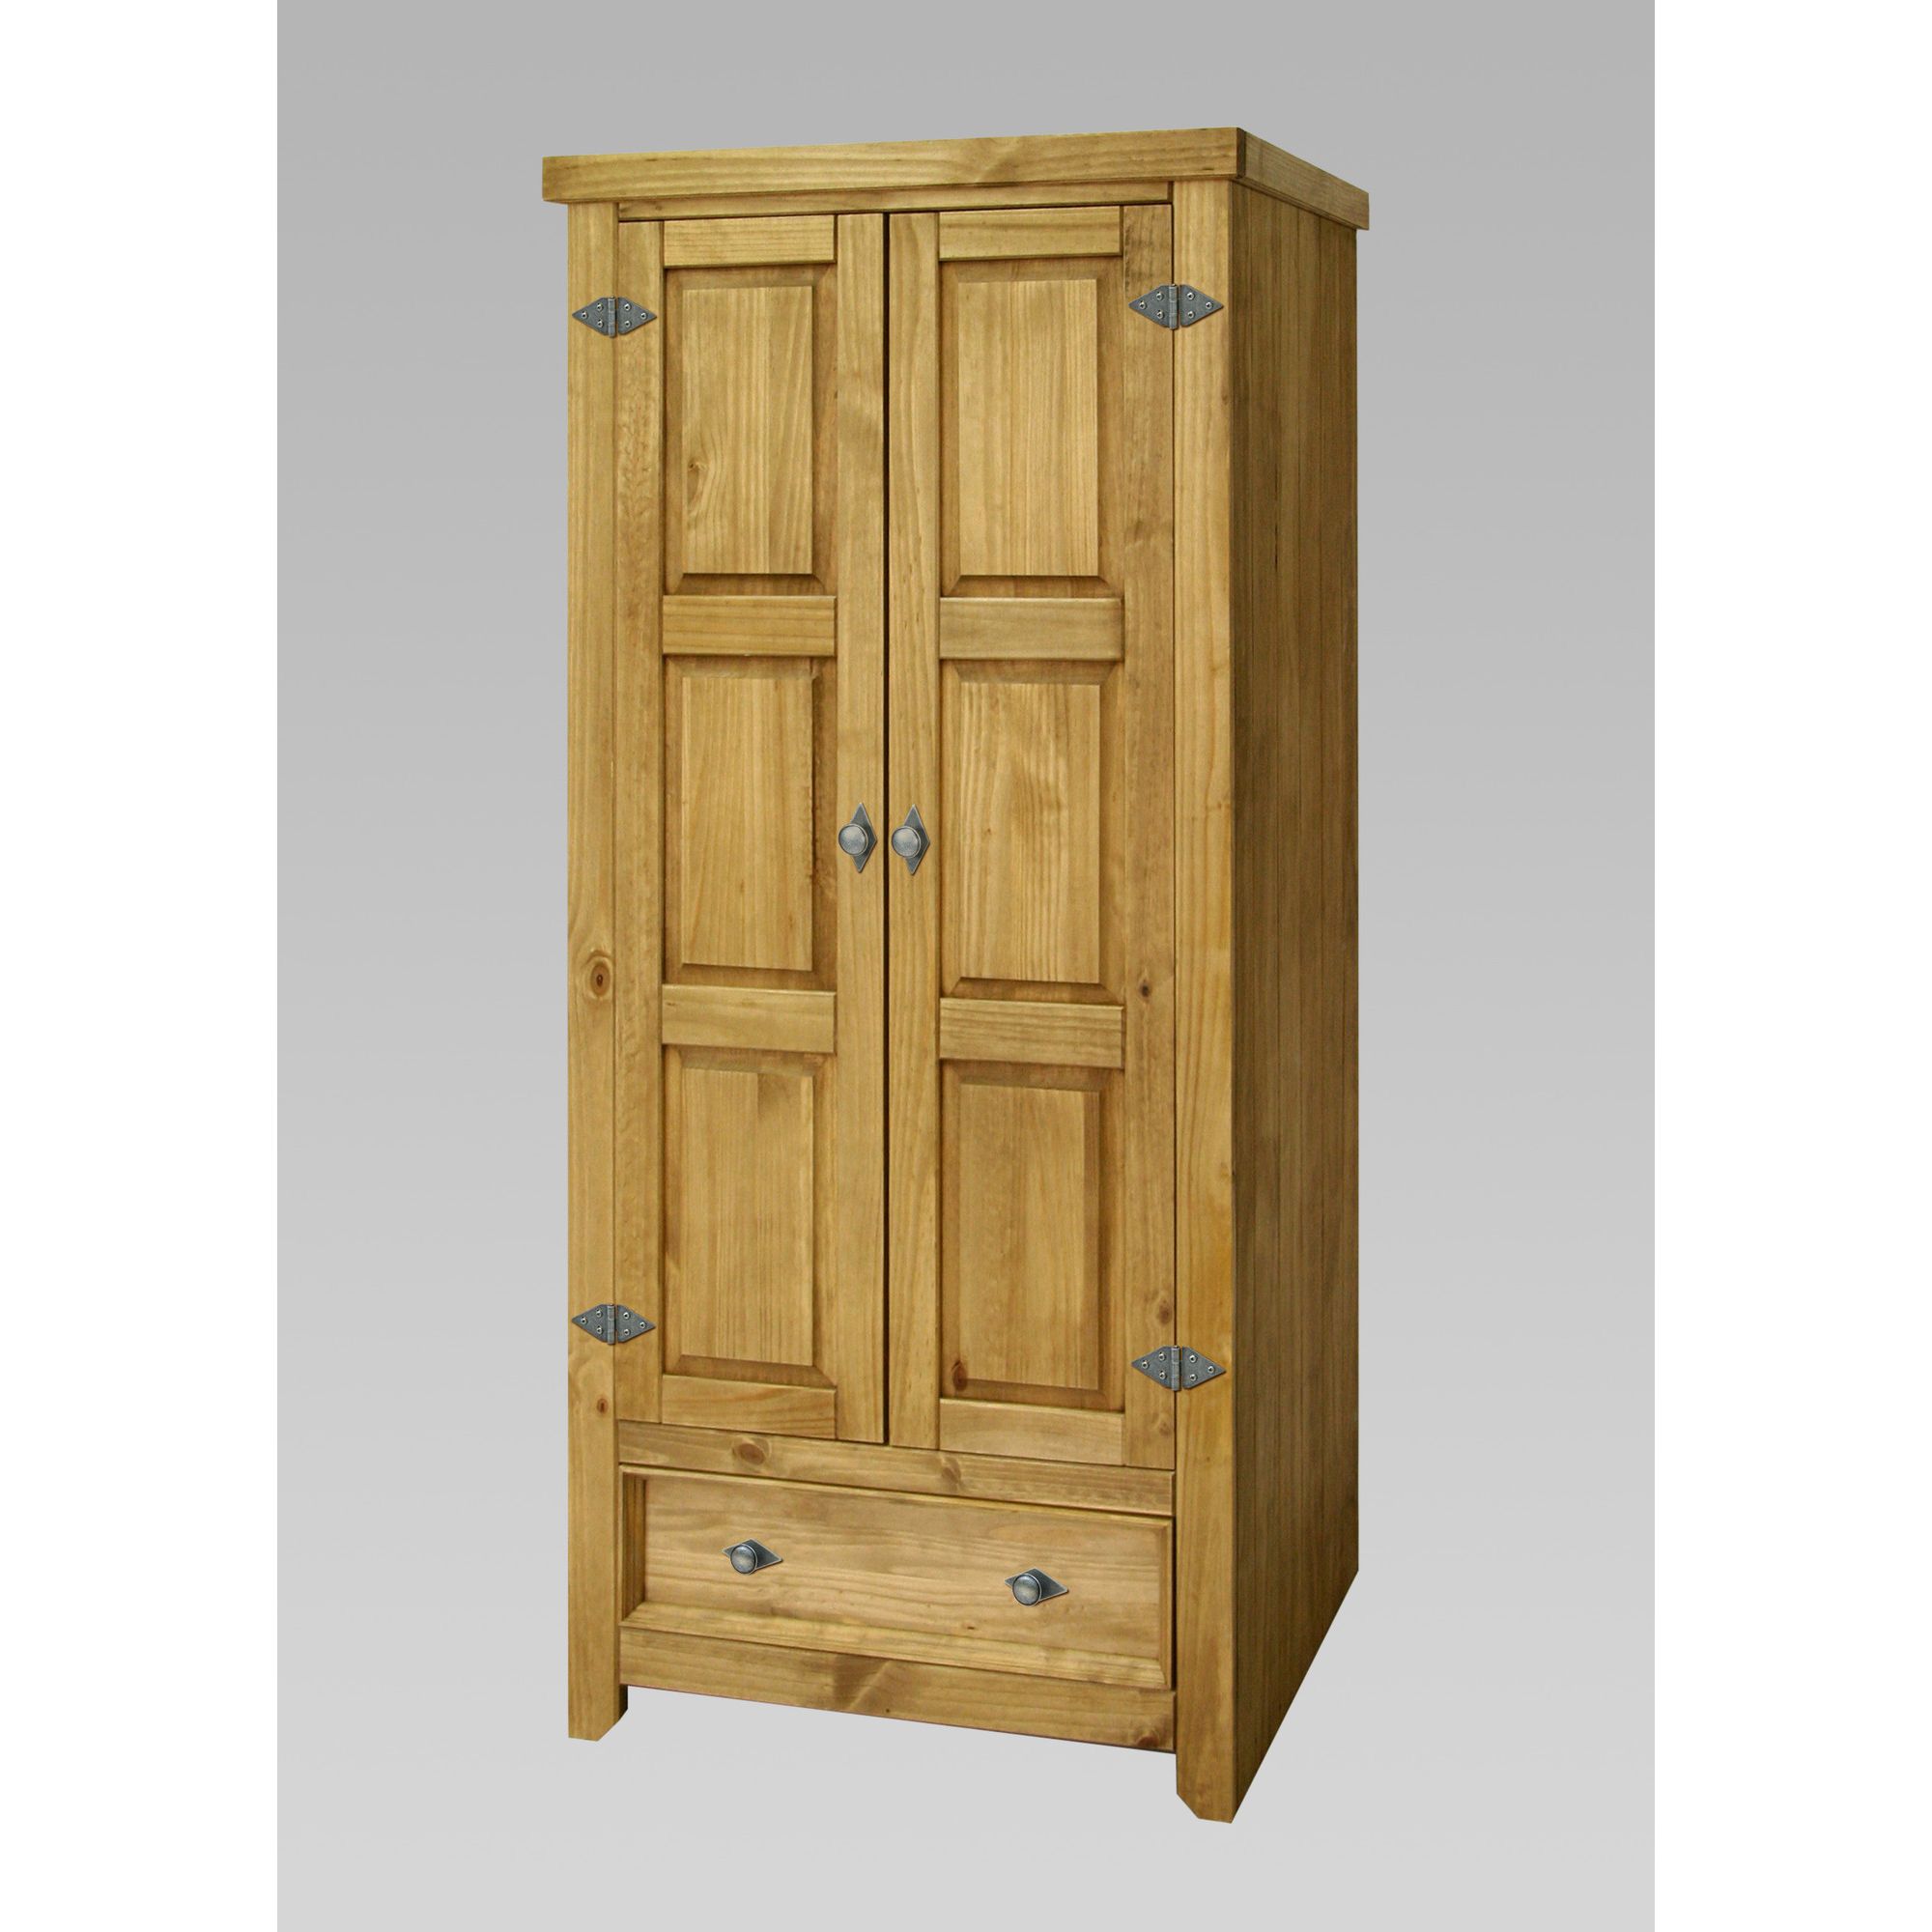 Home Essence Mendoza 2 Door and 1 Drawer Wardrobe in Hand at Tesco Direct